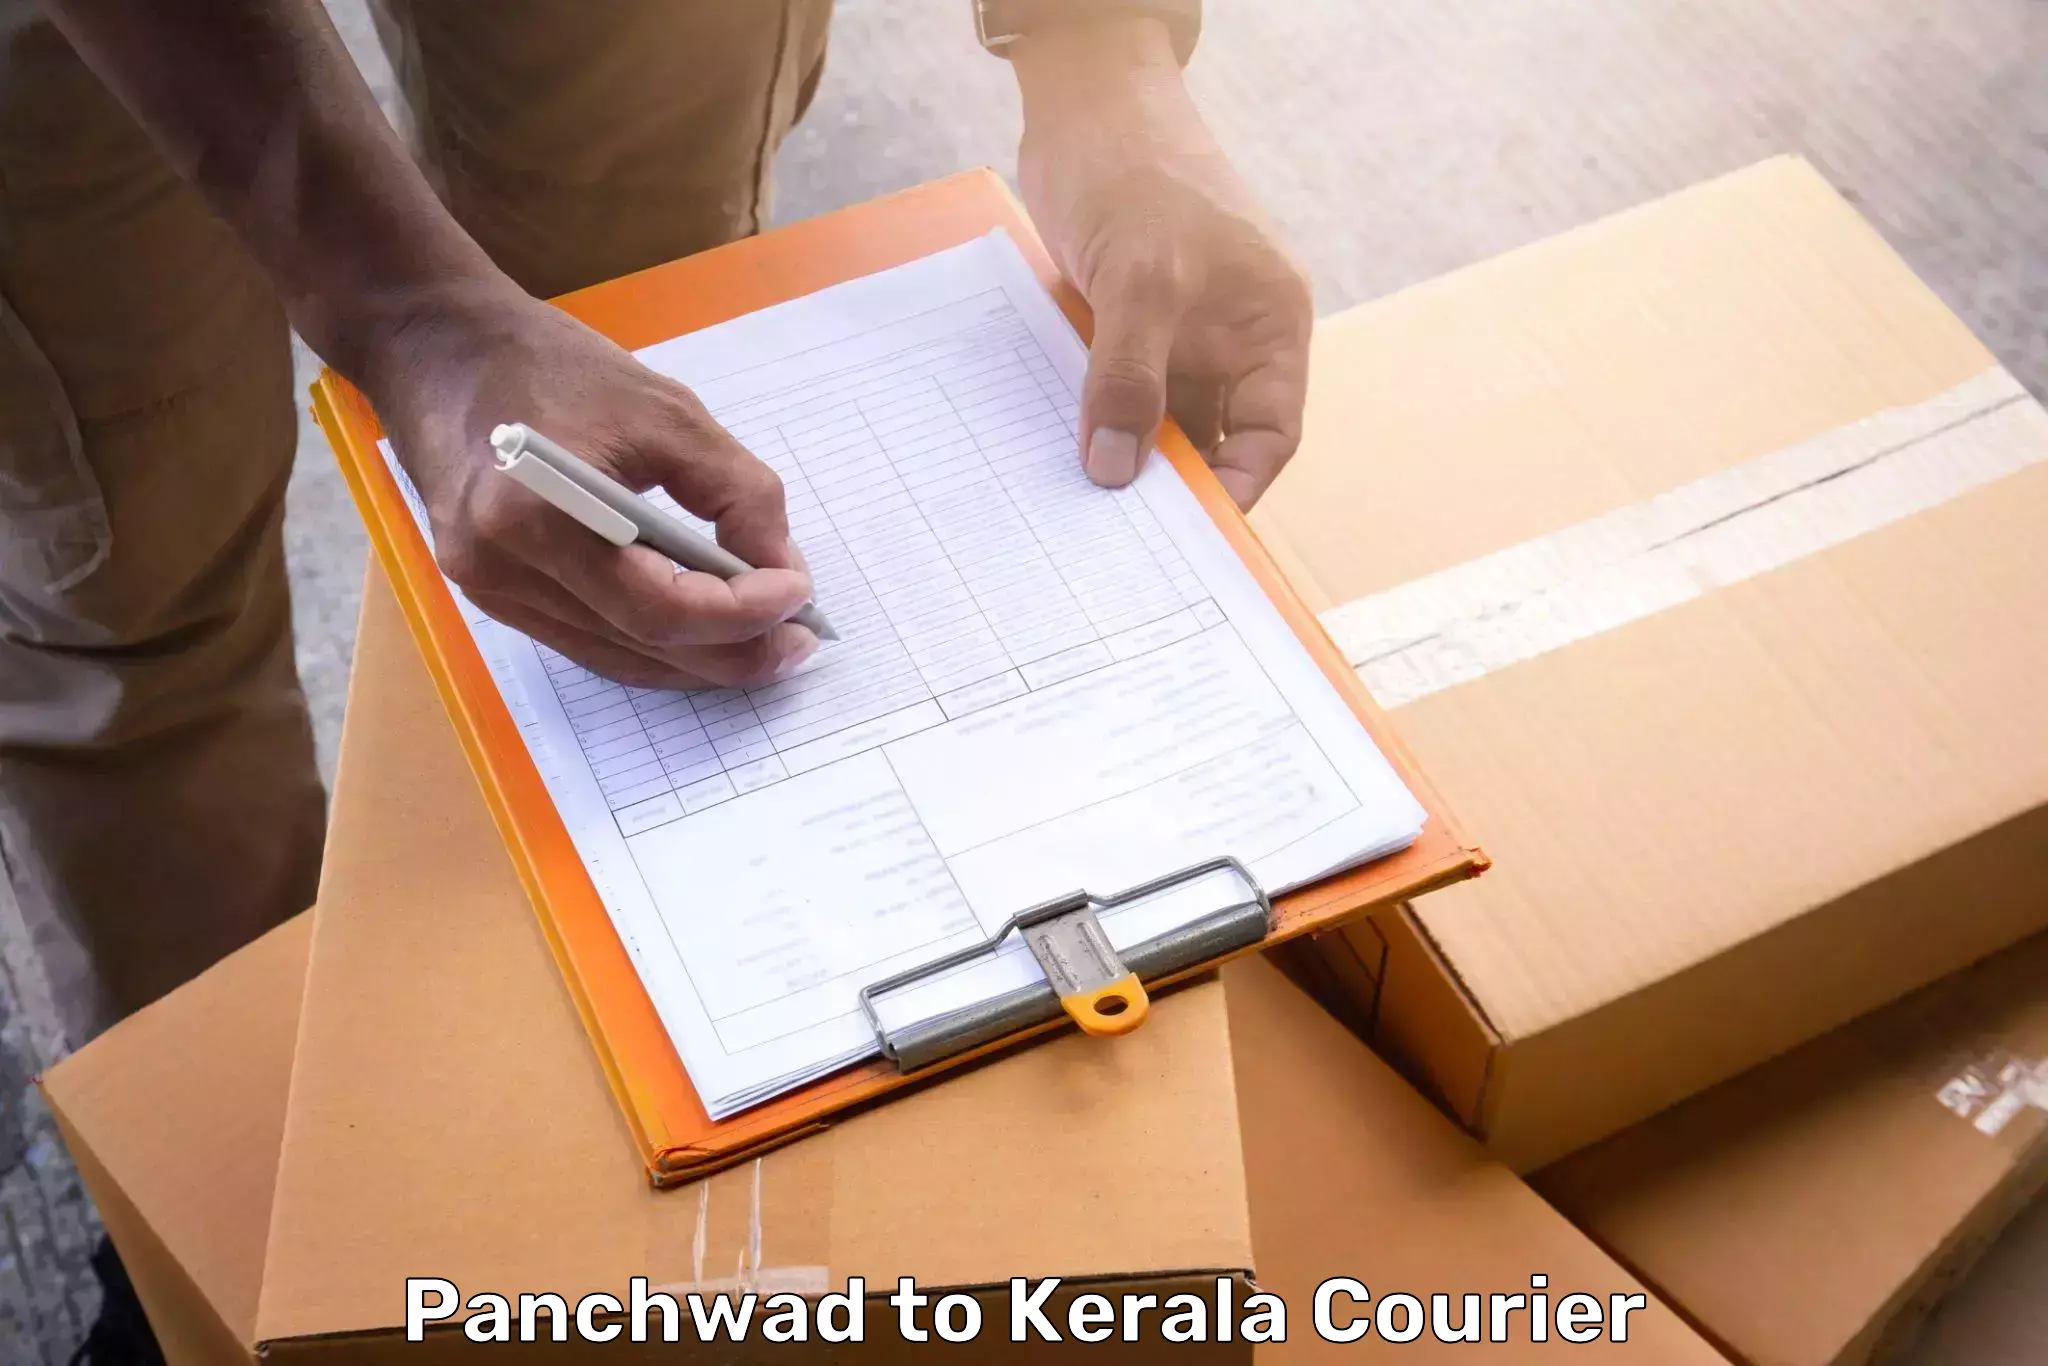 Luggage transport deals Panchwad to Kerala